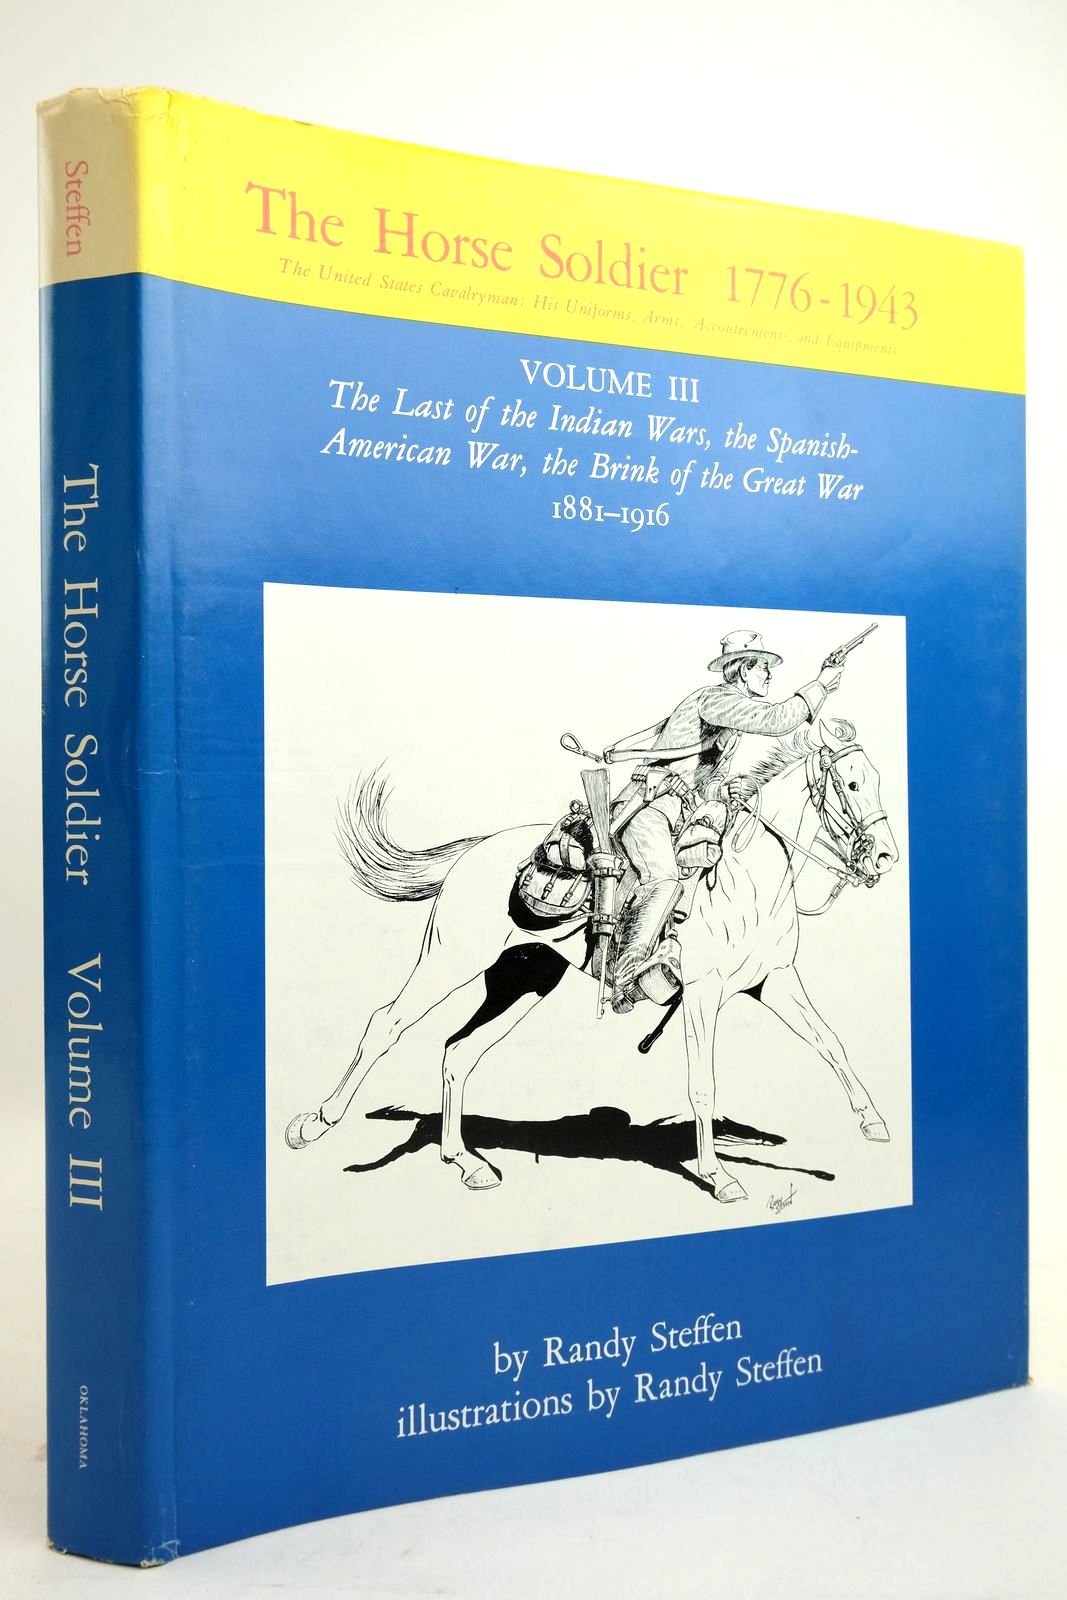 Photo of THE HORSE SOLDIER 1776-1943: VOLUME III: THE LAST OF THE INDIAN WARS, THE SPANISH-AMERICAN WAR, THE BRINK OF THE GREAT WAR 1881-1916 written by Steffen, Randy illustrated by Steffen, Randy published by University of Oklahoma Press (STOCK CODE: 2134515)  for sale by Stella & Rose's Books